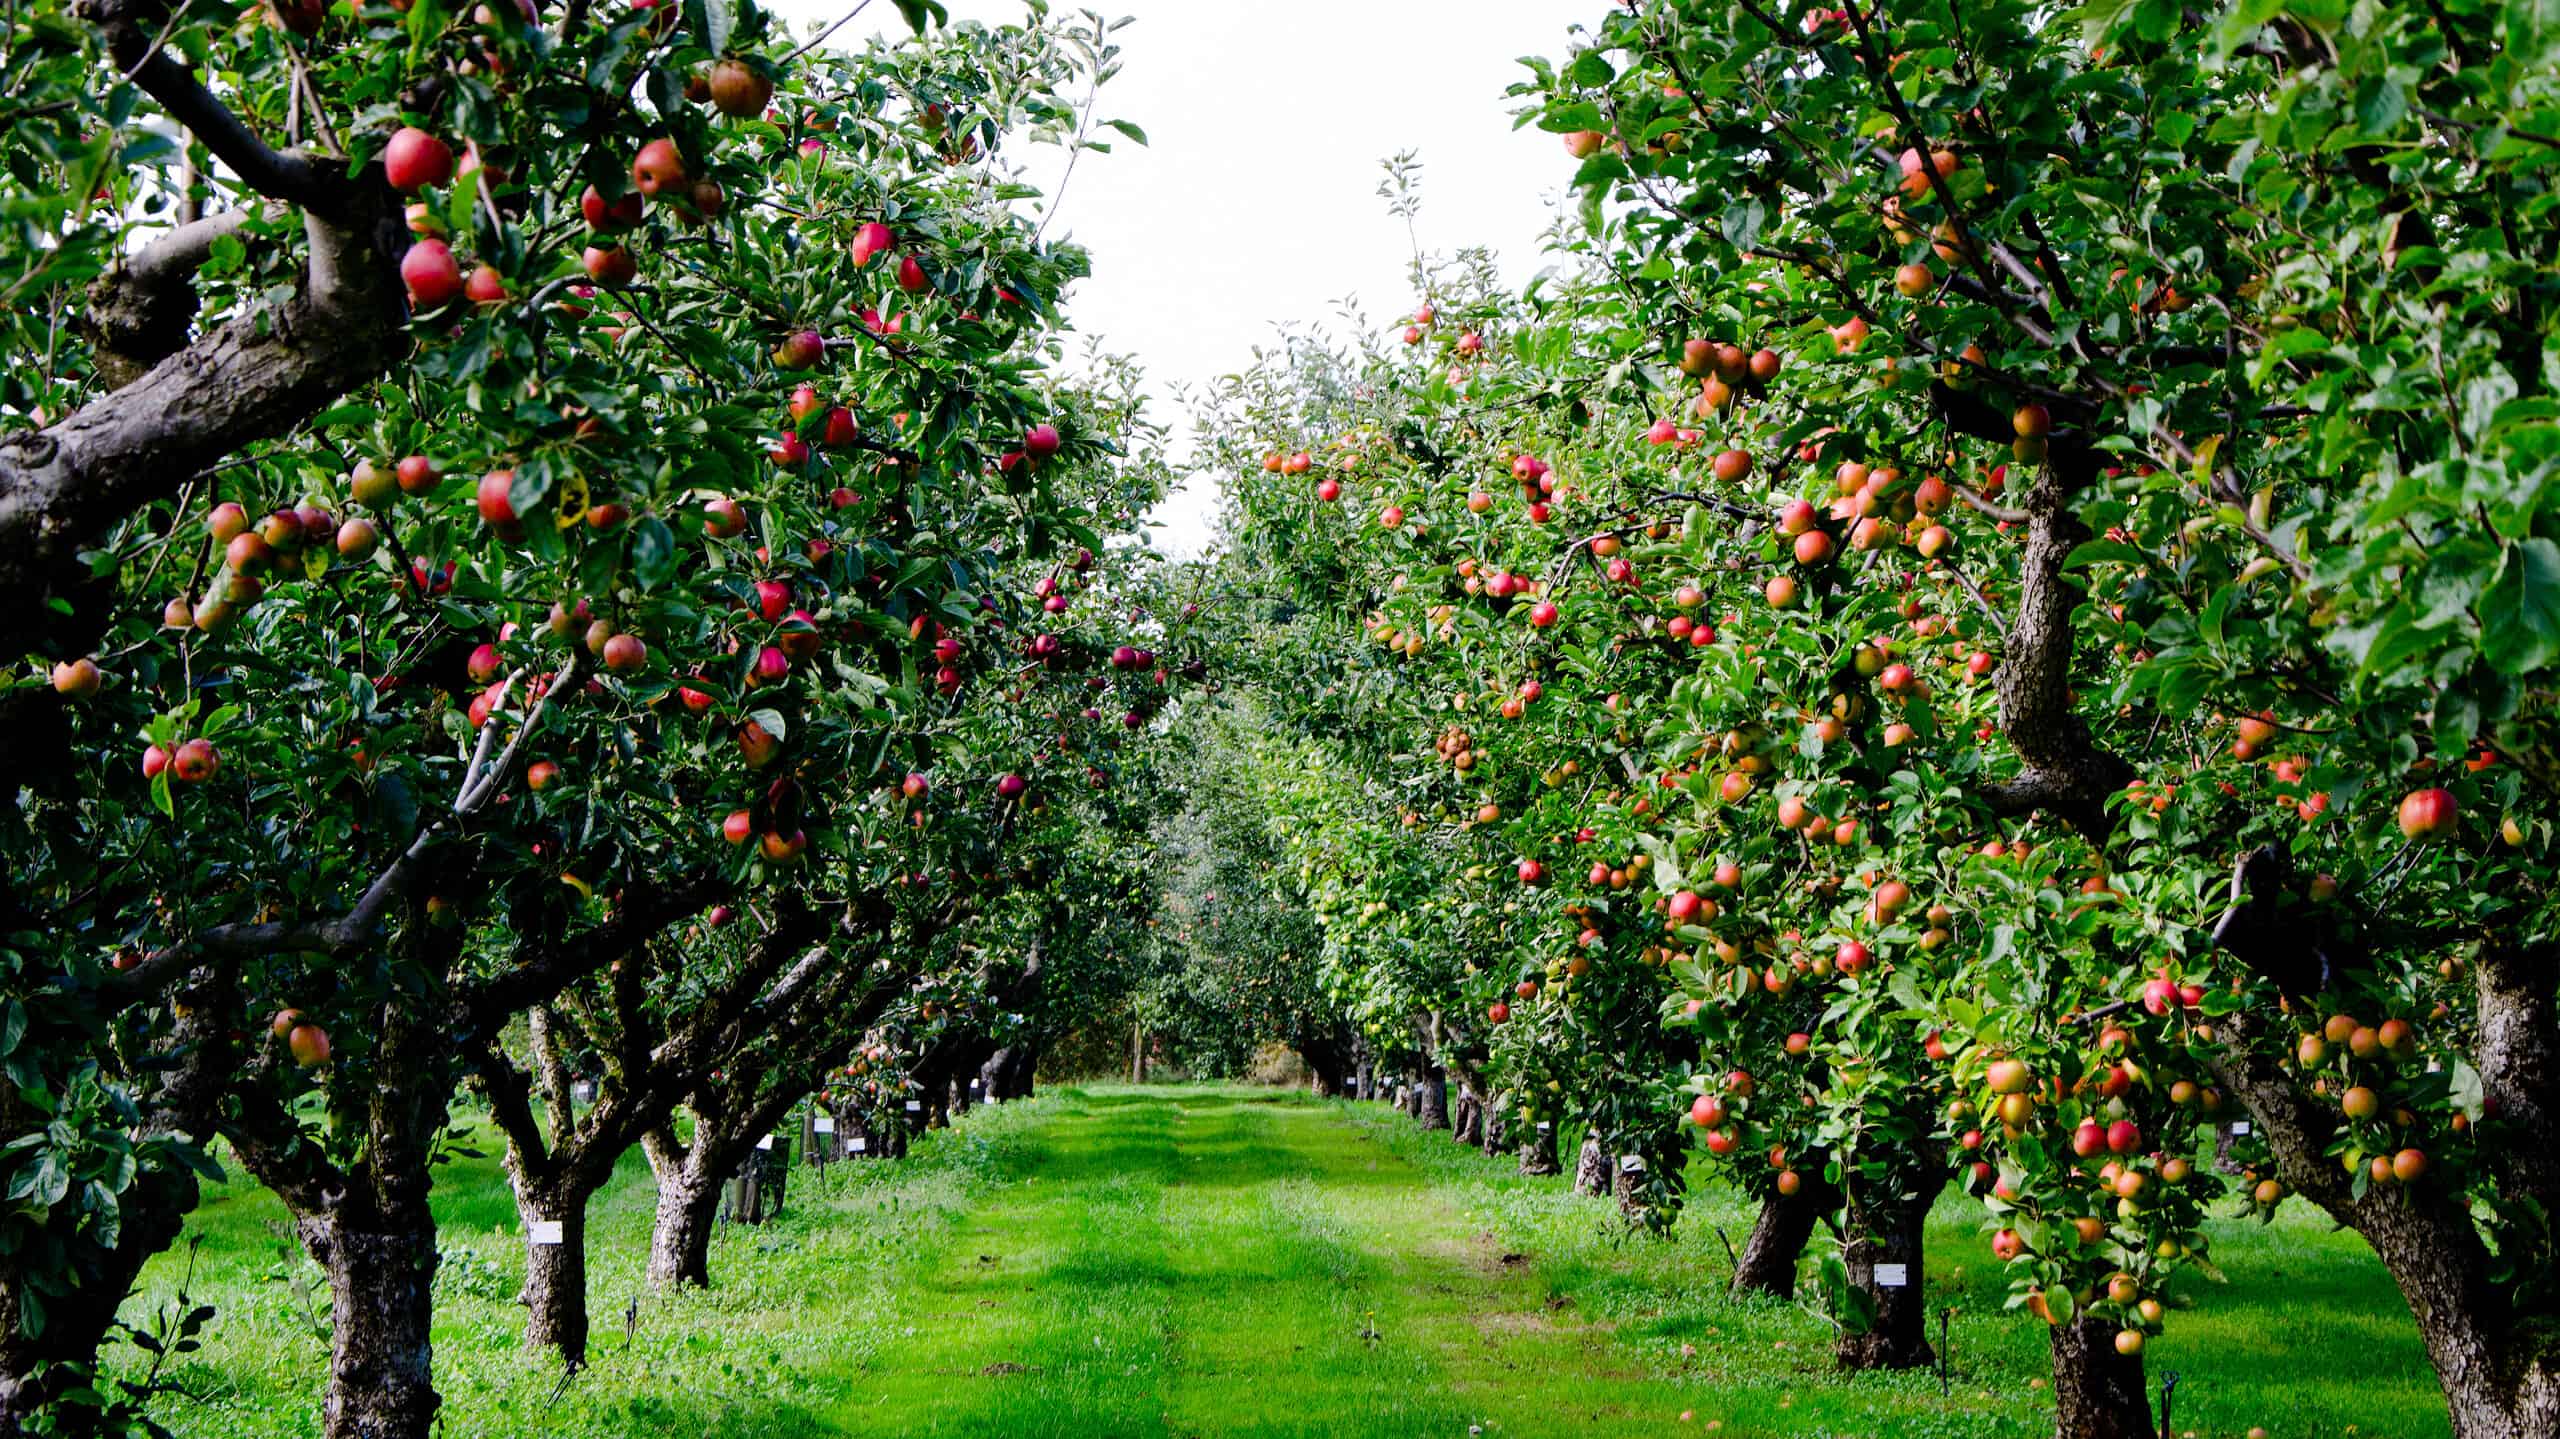 Row of trees in apple orchard